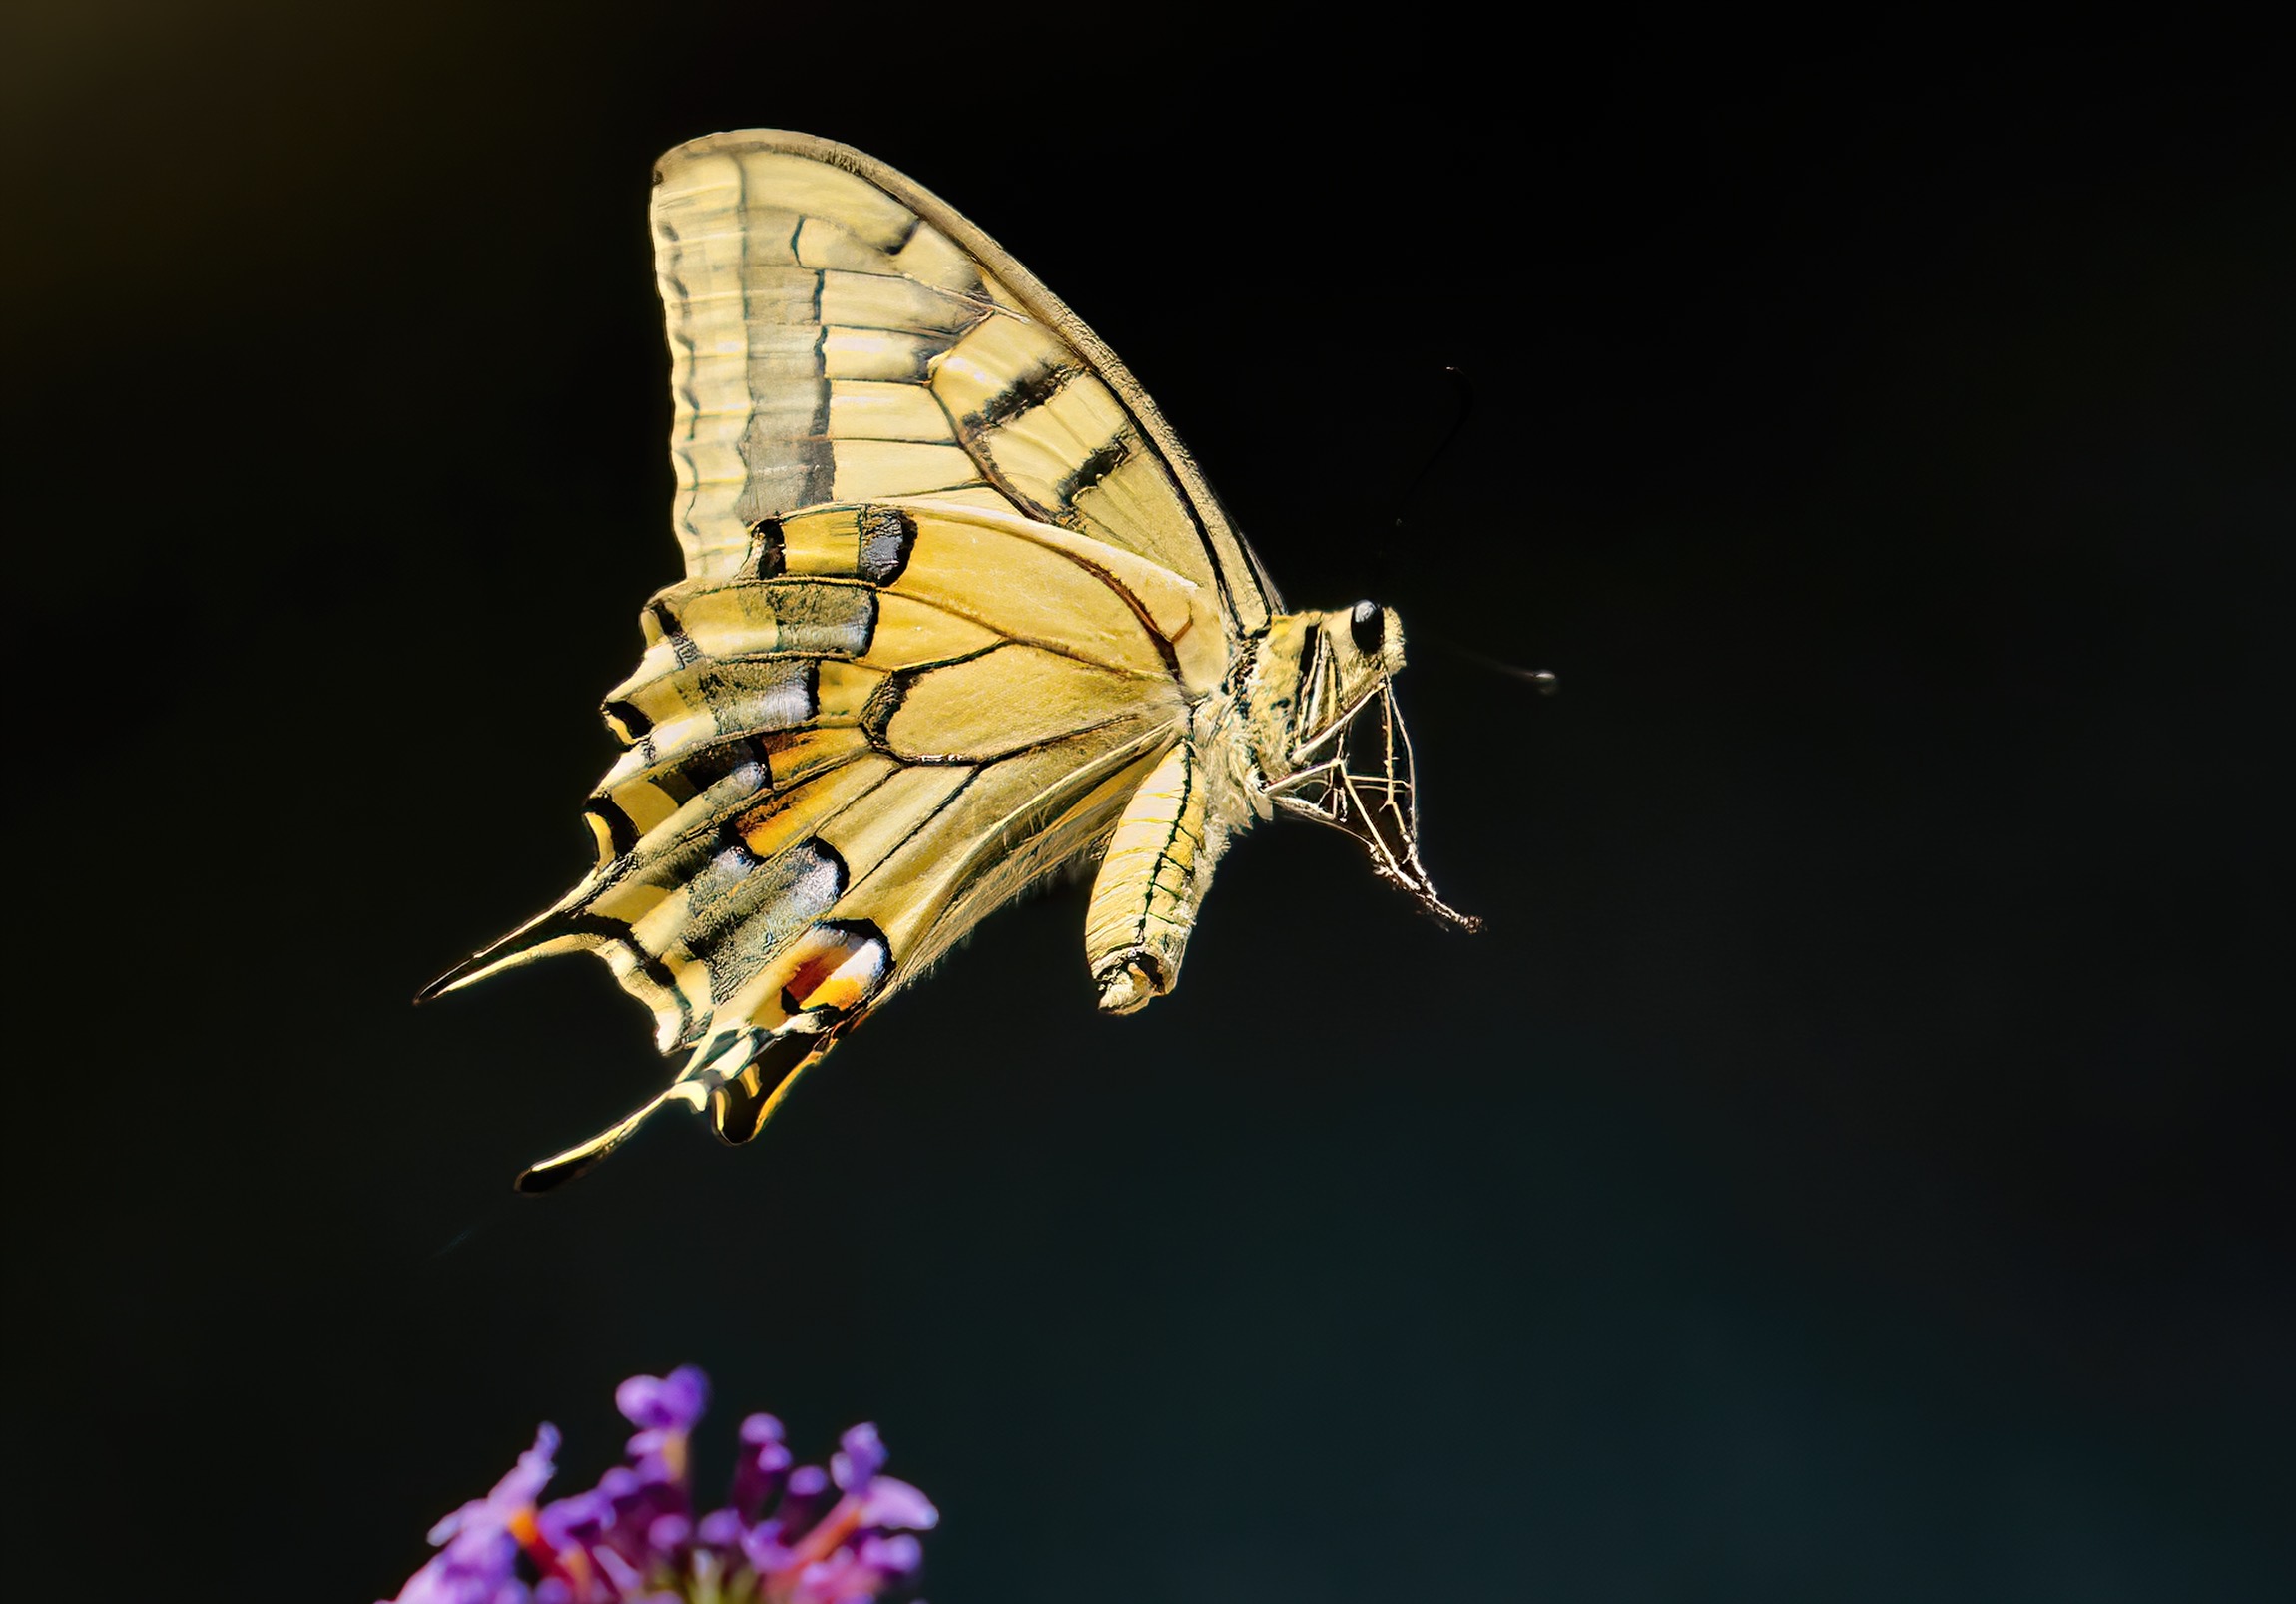 The Flying Machaon...